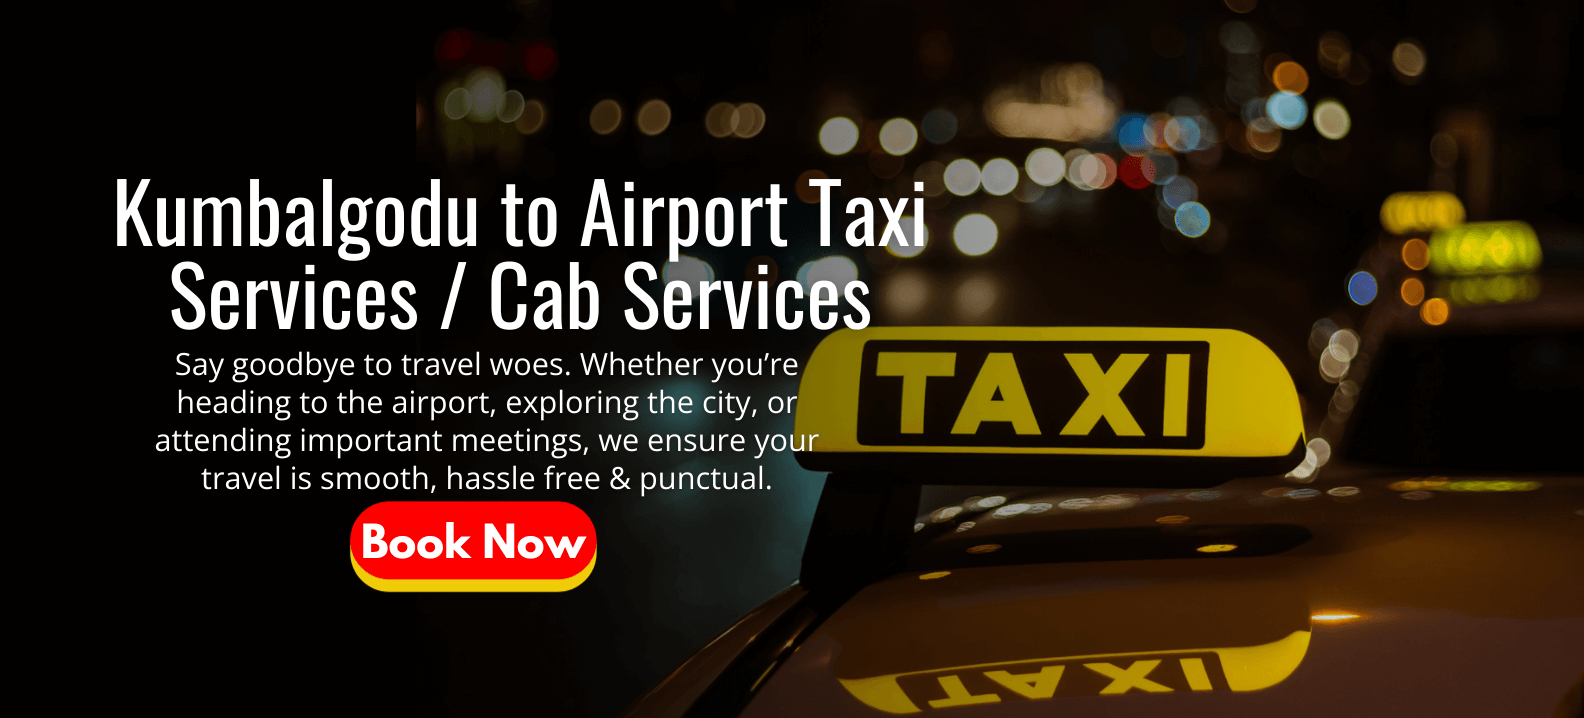 Kumbalgodu to Airport Taxi Services _ Cab Services